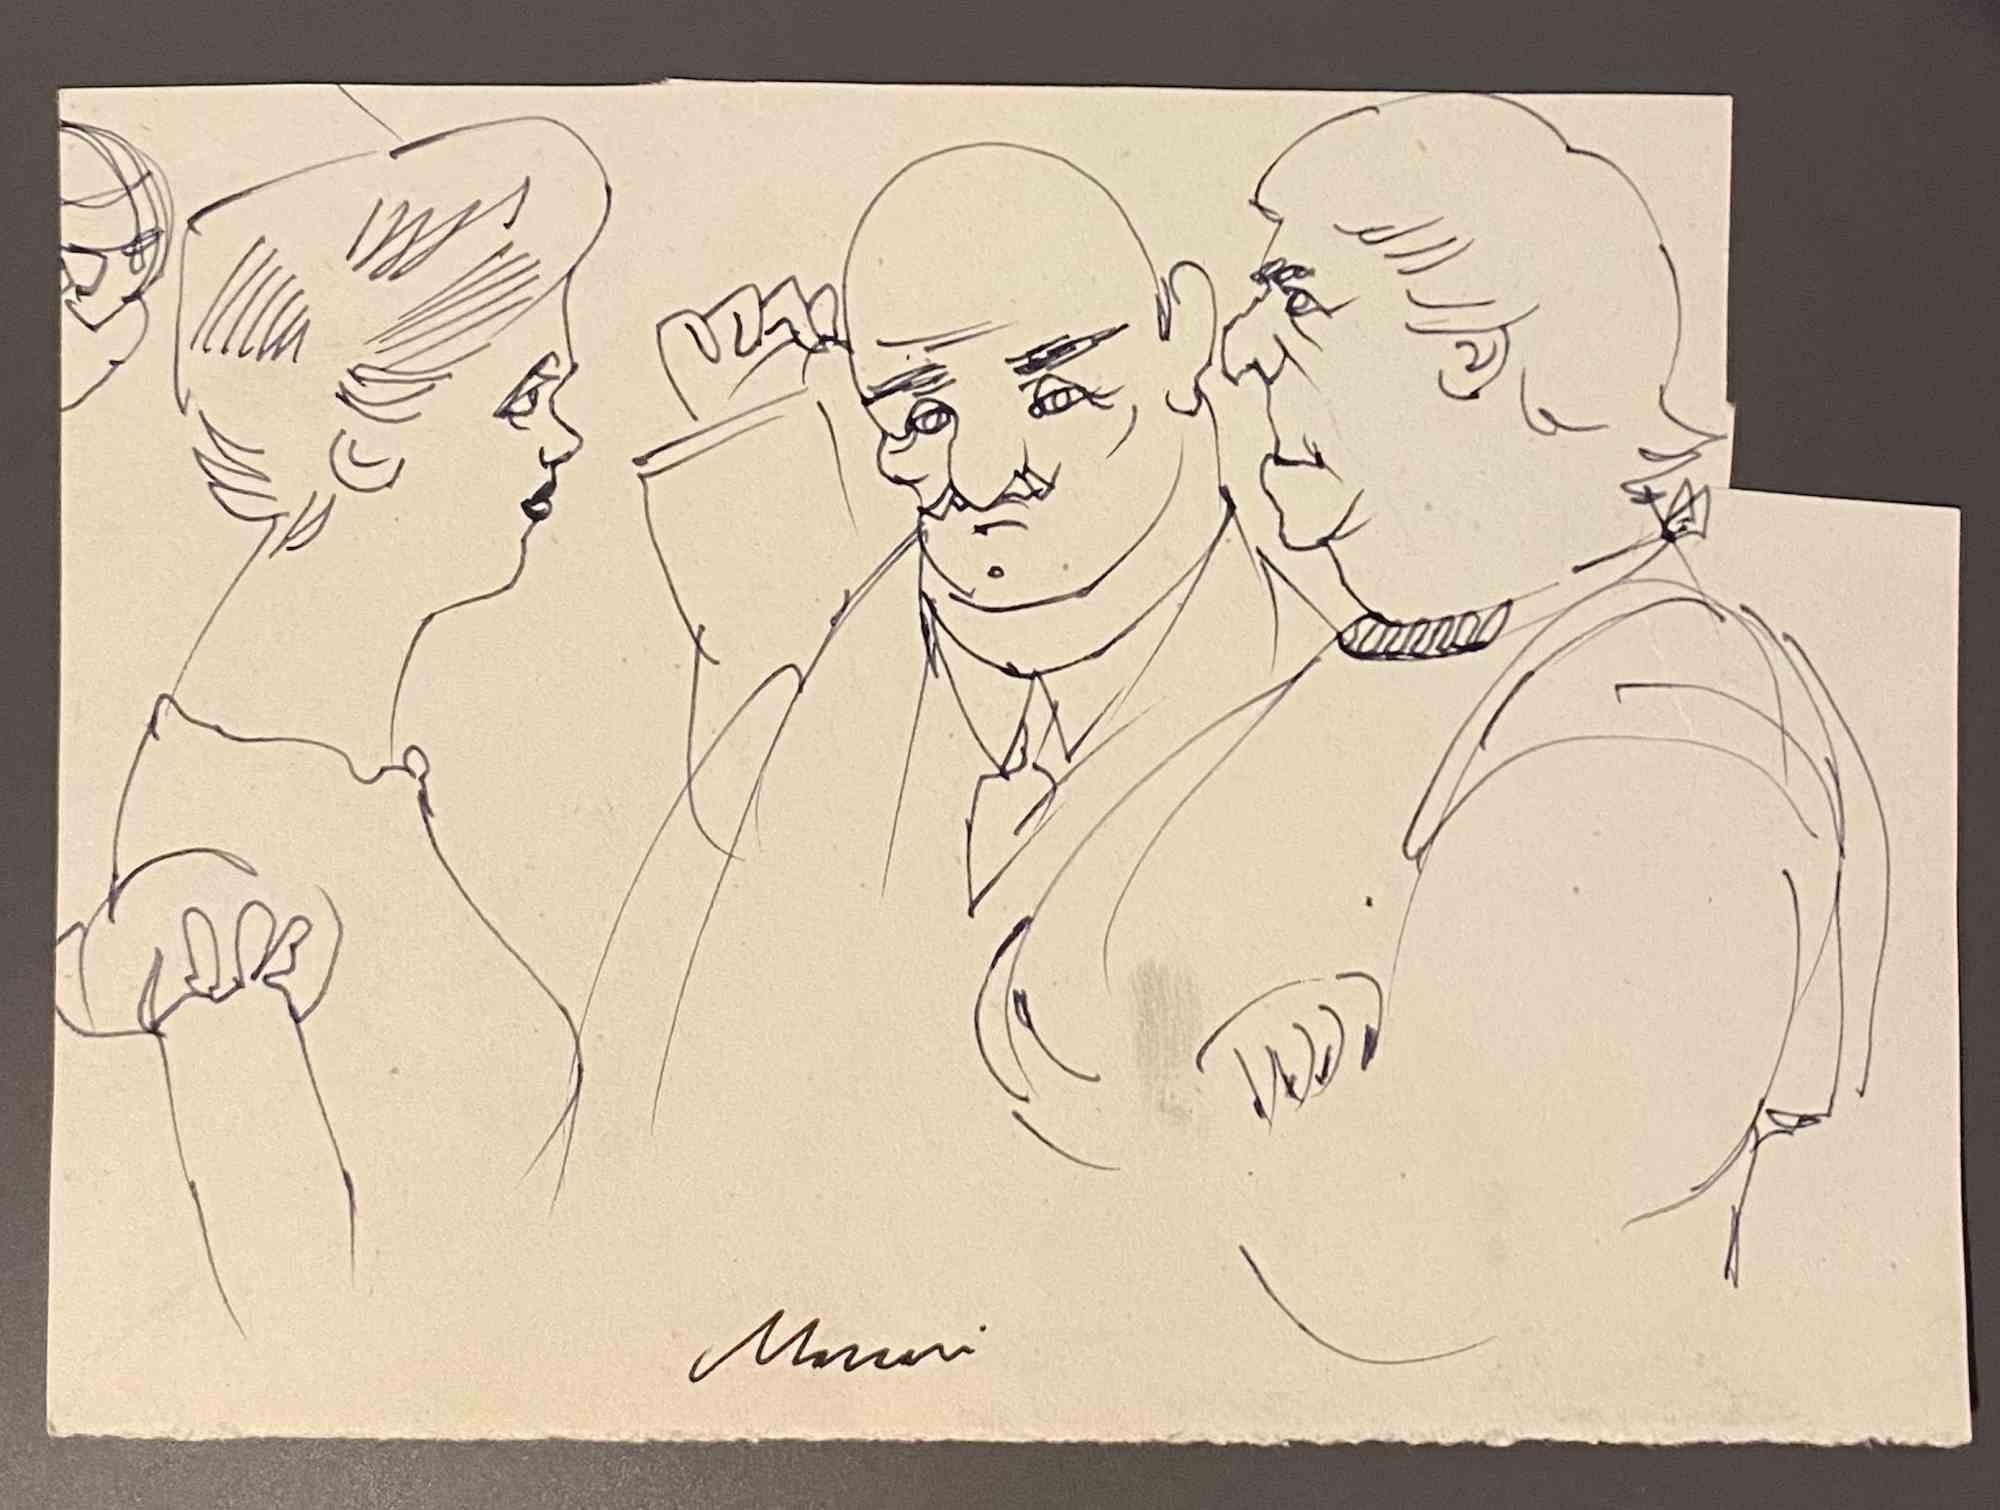 Figures is a pen Drawing realized by Mino Maccari  (1924-1989) in the Mid-20th Century.

Hand-signed on the lower.

Good conditions.

Mino Maccari (Siena, 1924-Rome, June 16, 1989) was an Italian writer, painter, engraver and journalist, winner of